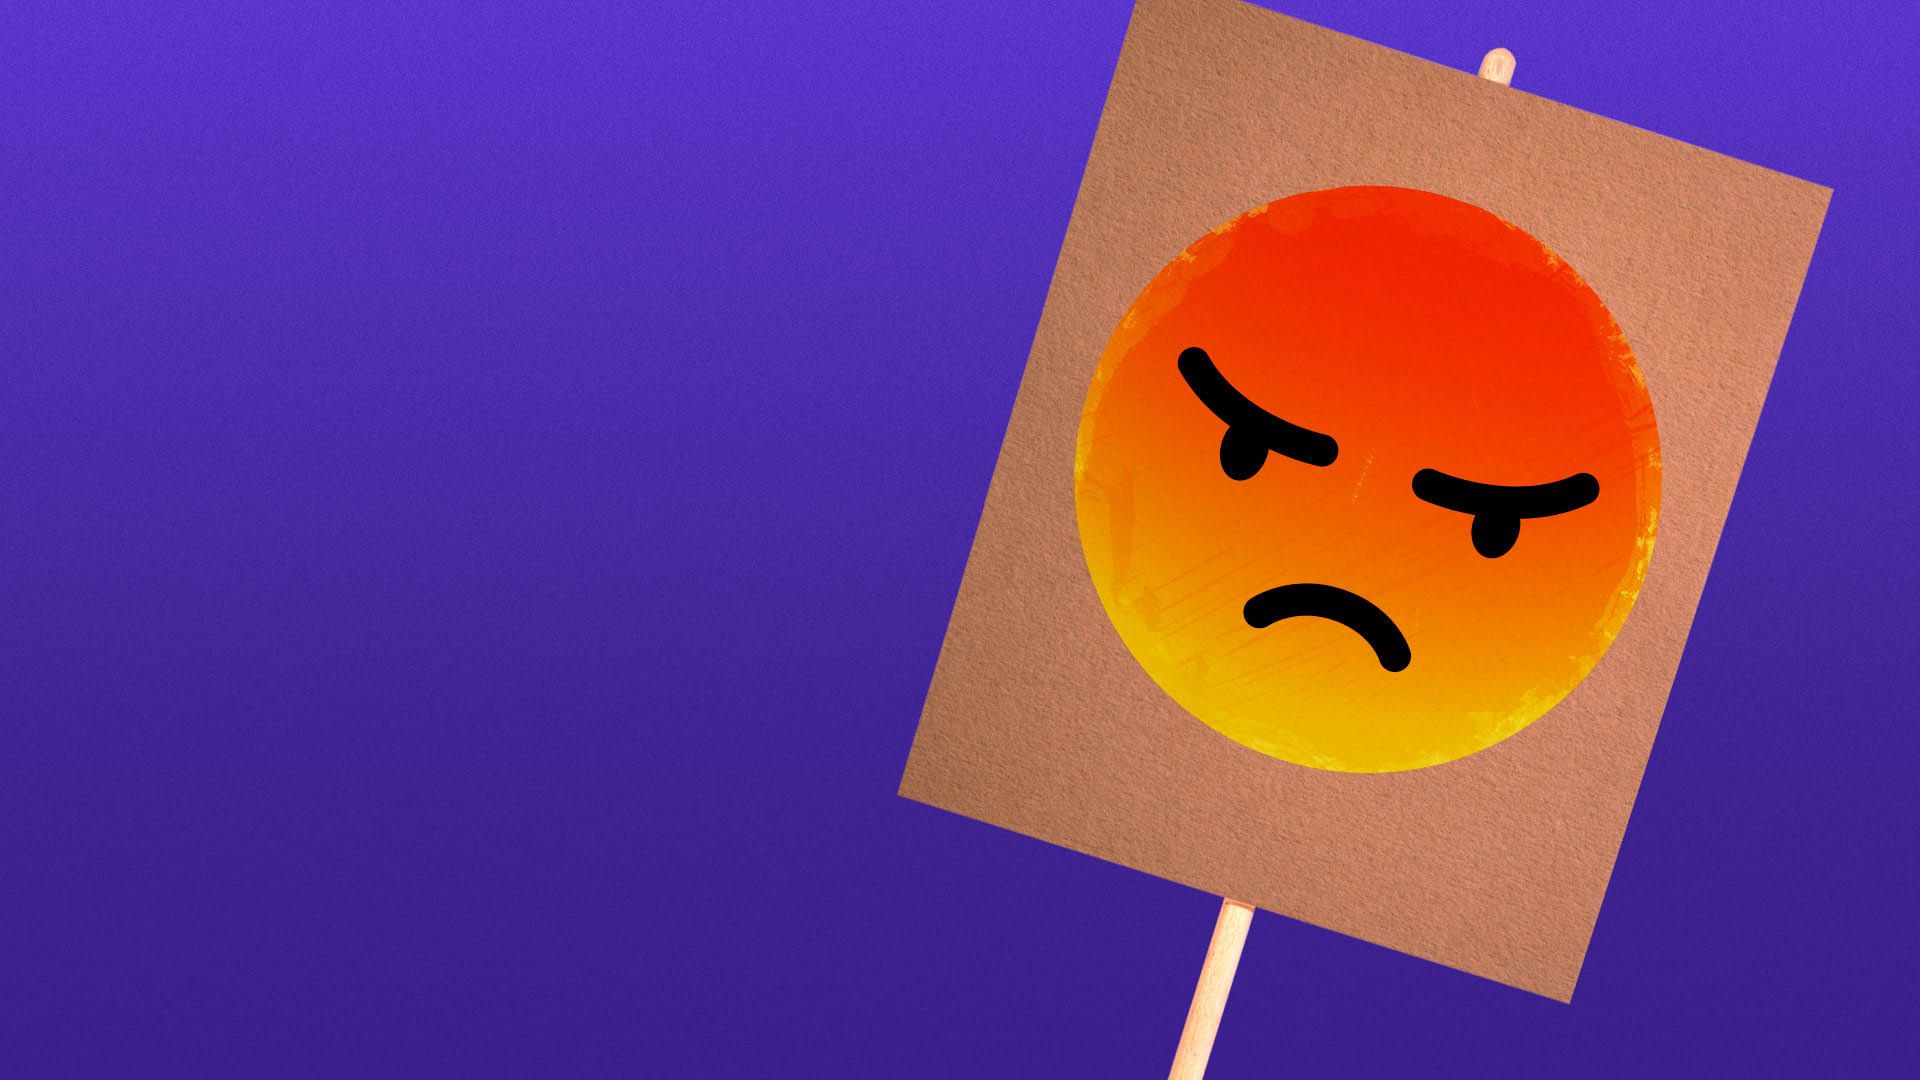 Illustration of protest sign with angry emoji.